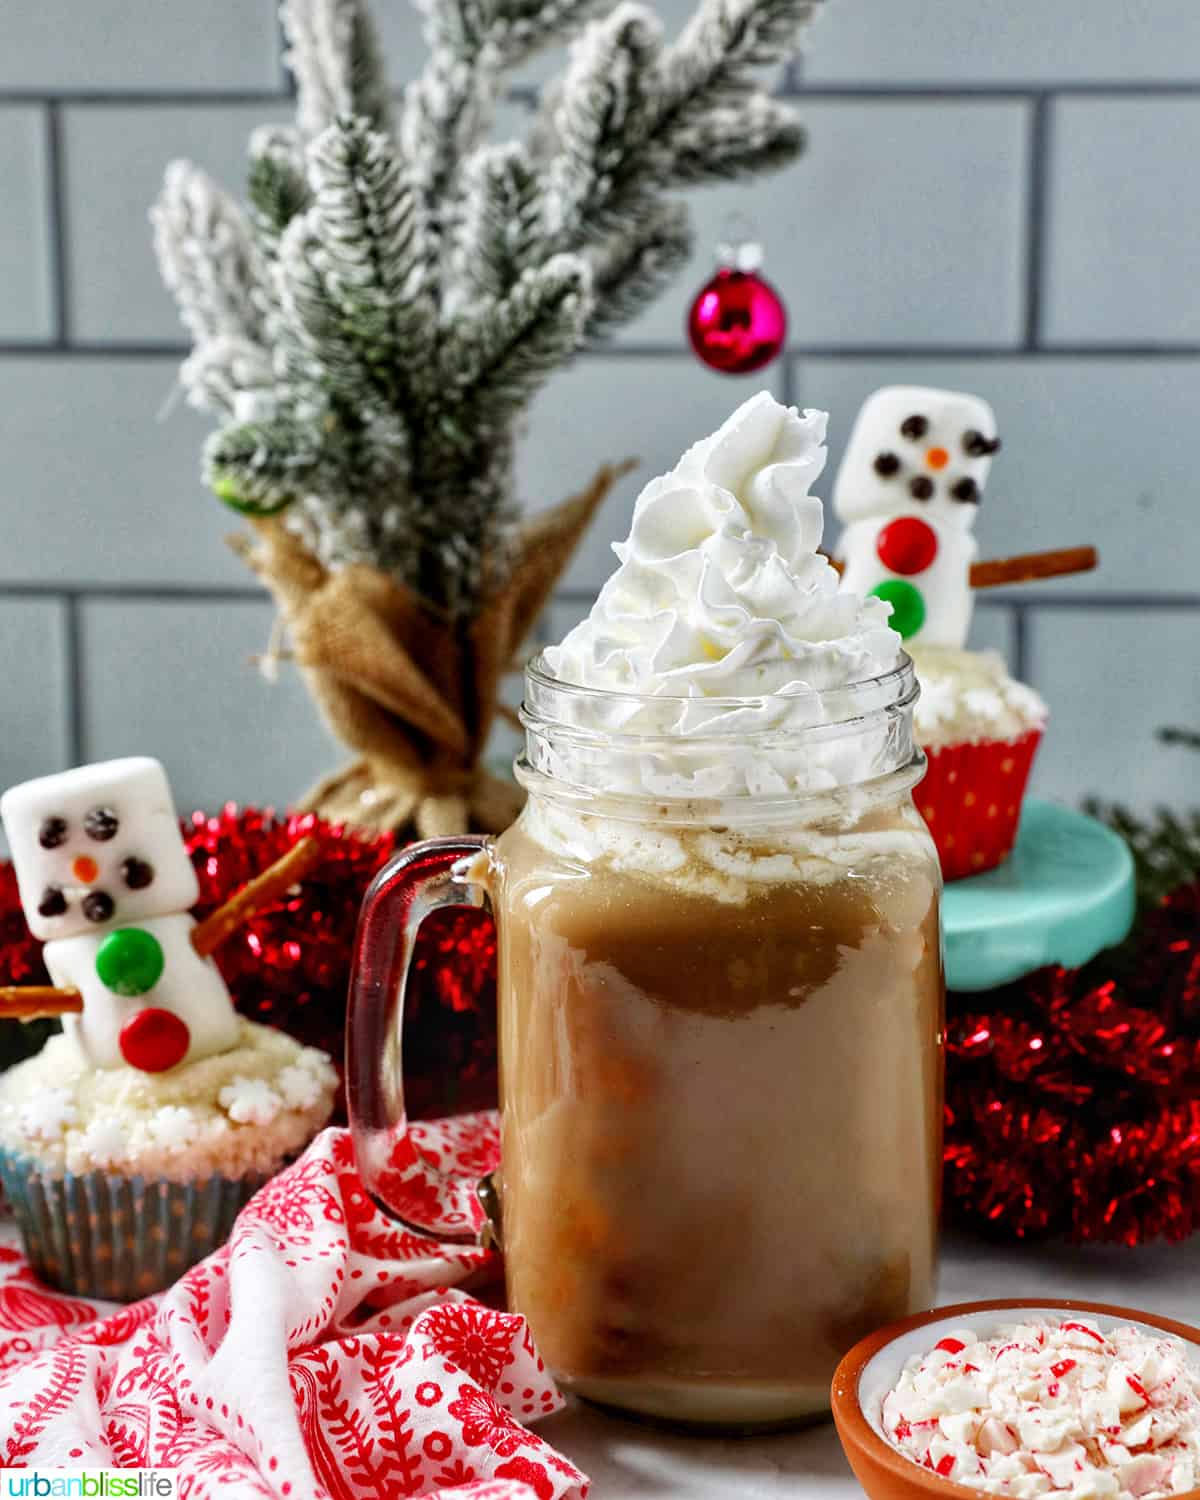 glass mug of white chocolate peppermint mocha with whipped cream with Christmas holiday decorations in the background.